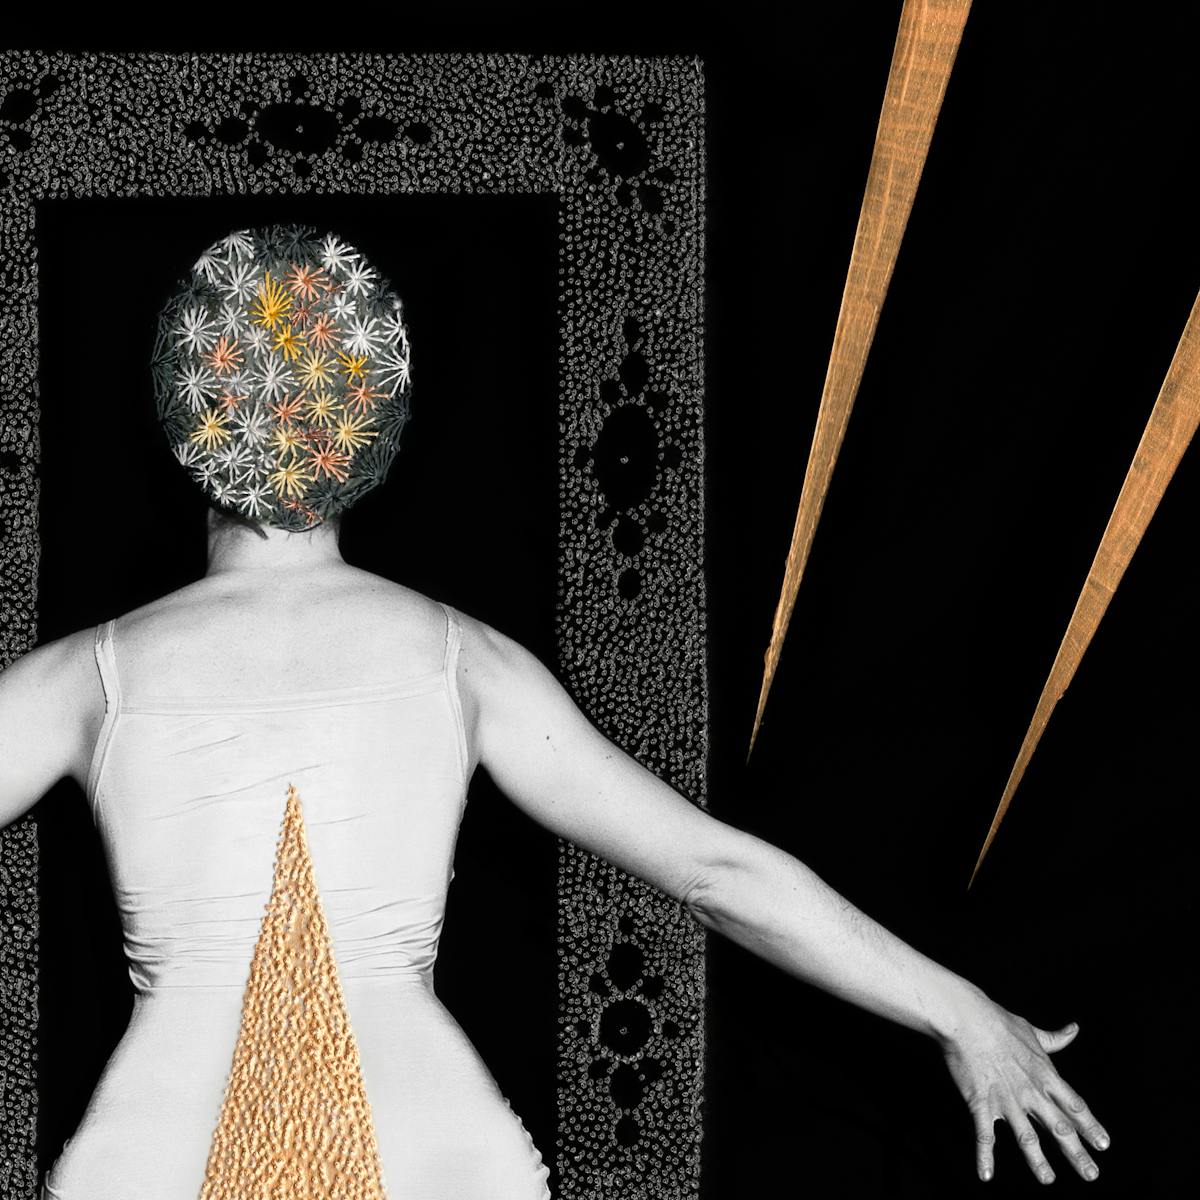 Artwork made up of a black and white photograph of a female figure from behind, from the waist up, against a black background. Her arms are held out straight to either side, her fingers are outstretched. Embroidered into the photographic print with yellow and orange coloured thread is a crisscross floral pattern which exactly covers her head and hair. Across her back, in a copper coloured textured paint is a large  triangle. In front of the figure is a large rectangular frame made up of a layered texture of grey dots which forms a doorway. Either side of the figure are long copper coloured shards made in metallic paint which seem to be reaching out to tether her arms.